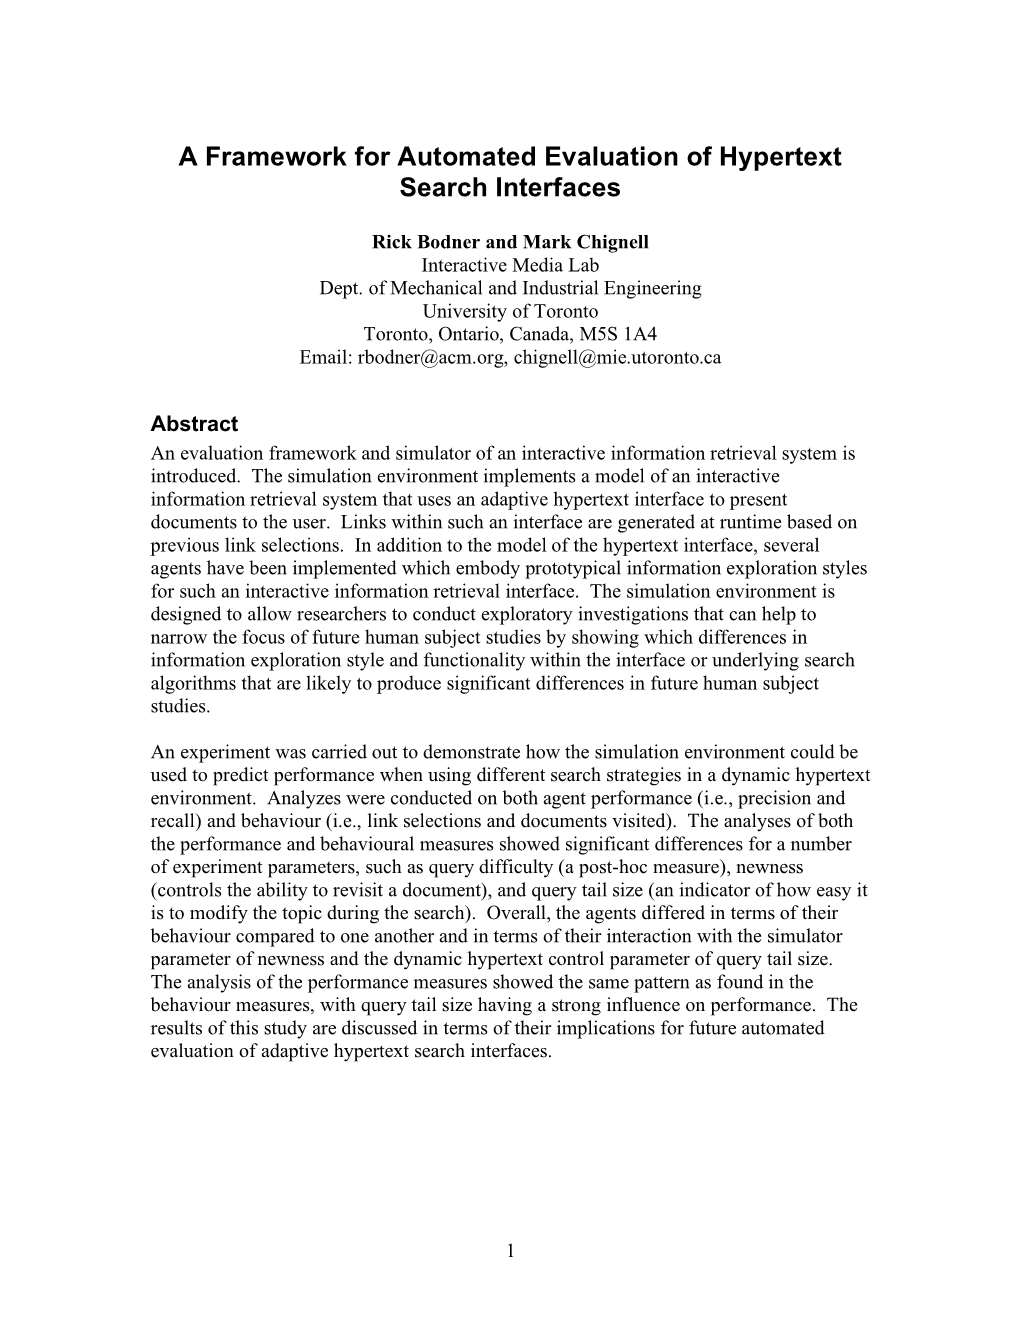 A Framework for Automated Evaluation of Hypertext Search Interfaces